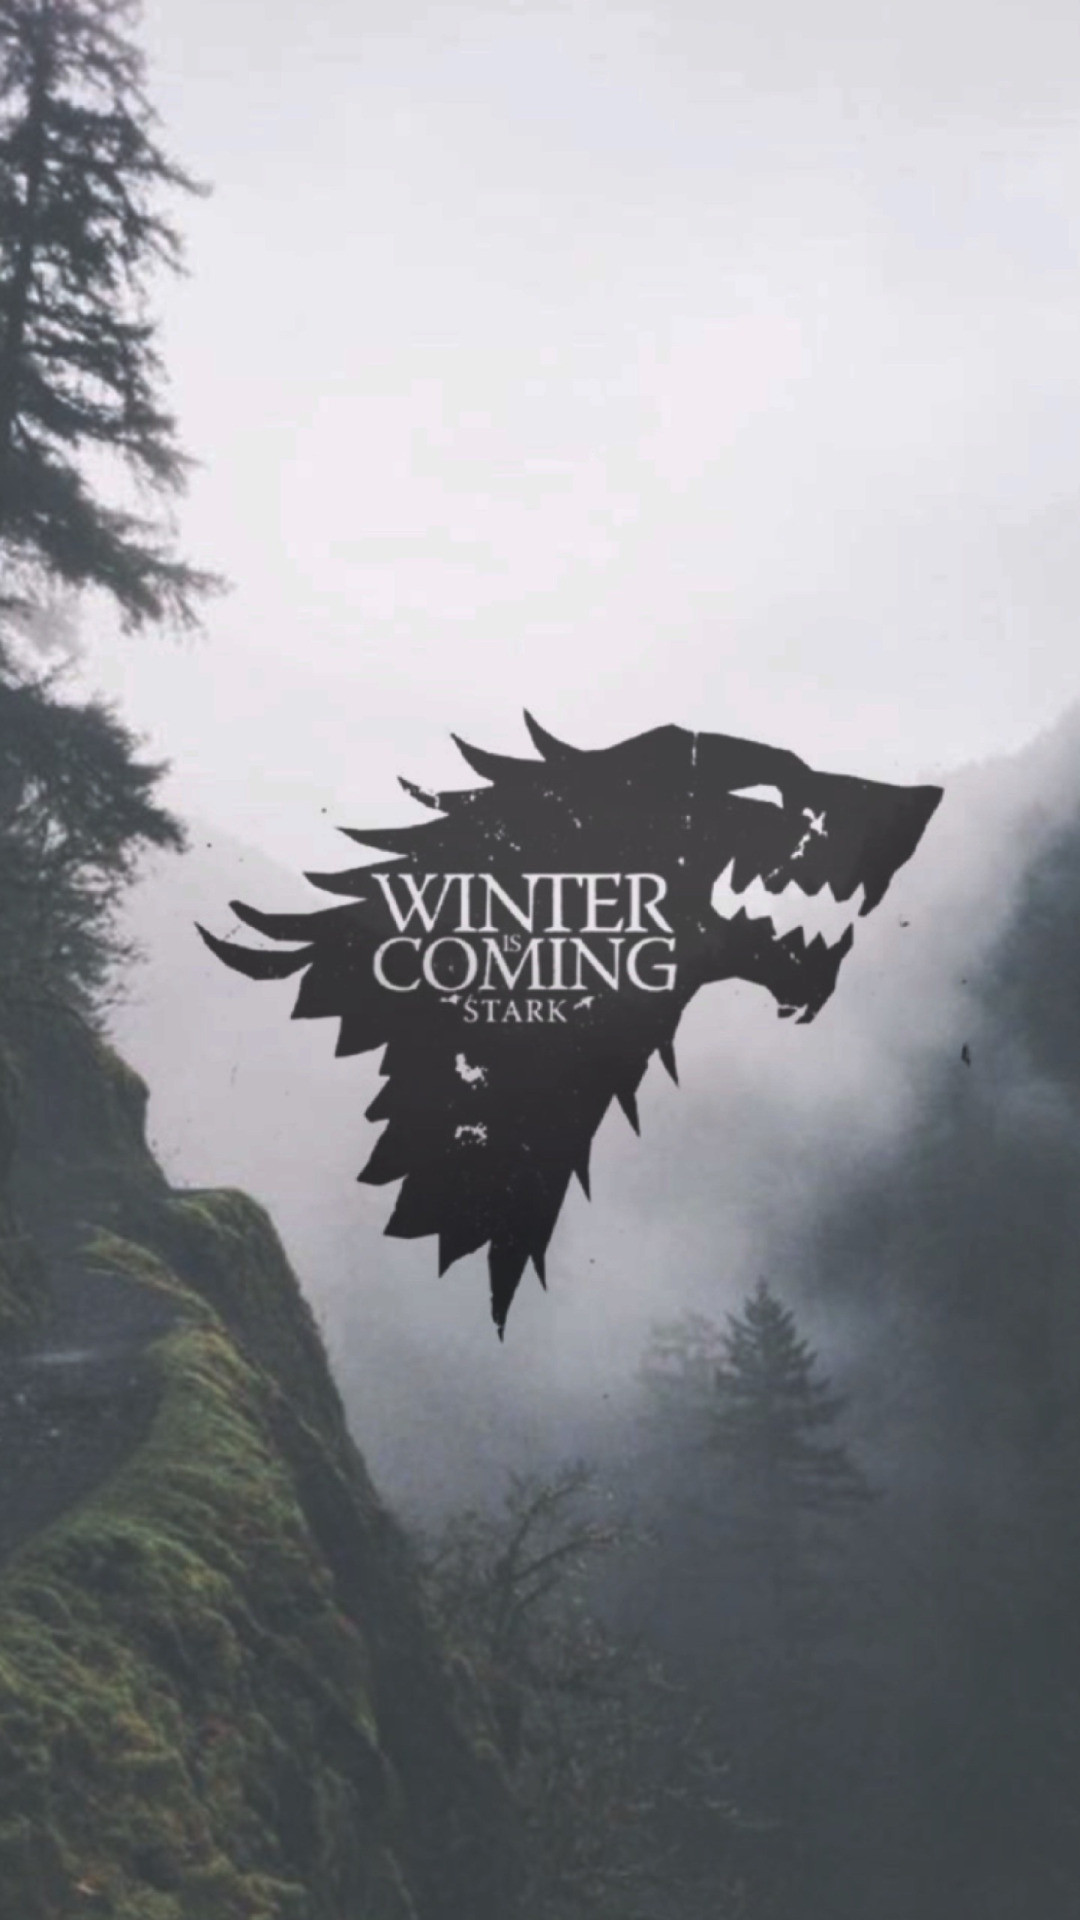 1080x1920 Best 10+ Winter is coming wallpaper ideas on Pinterest | House stark, House  stark sigil and Winter is coming